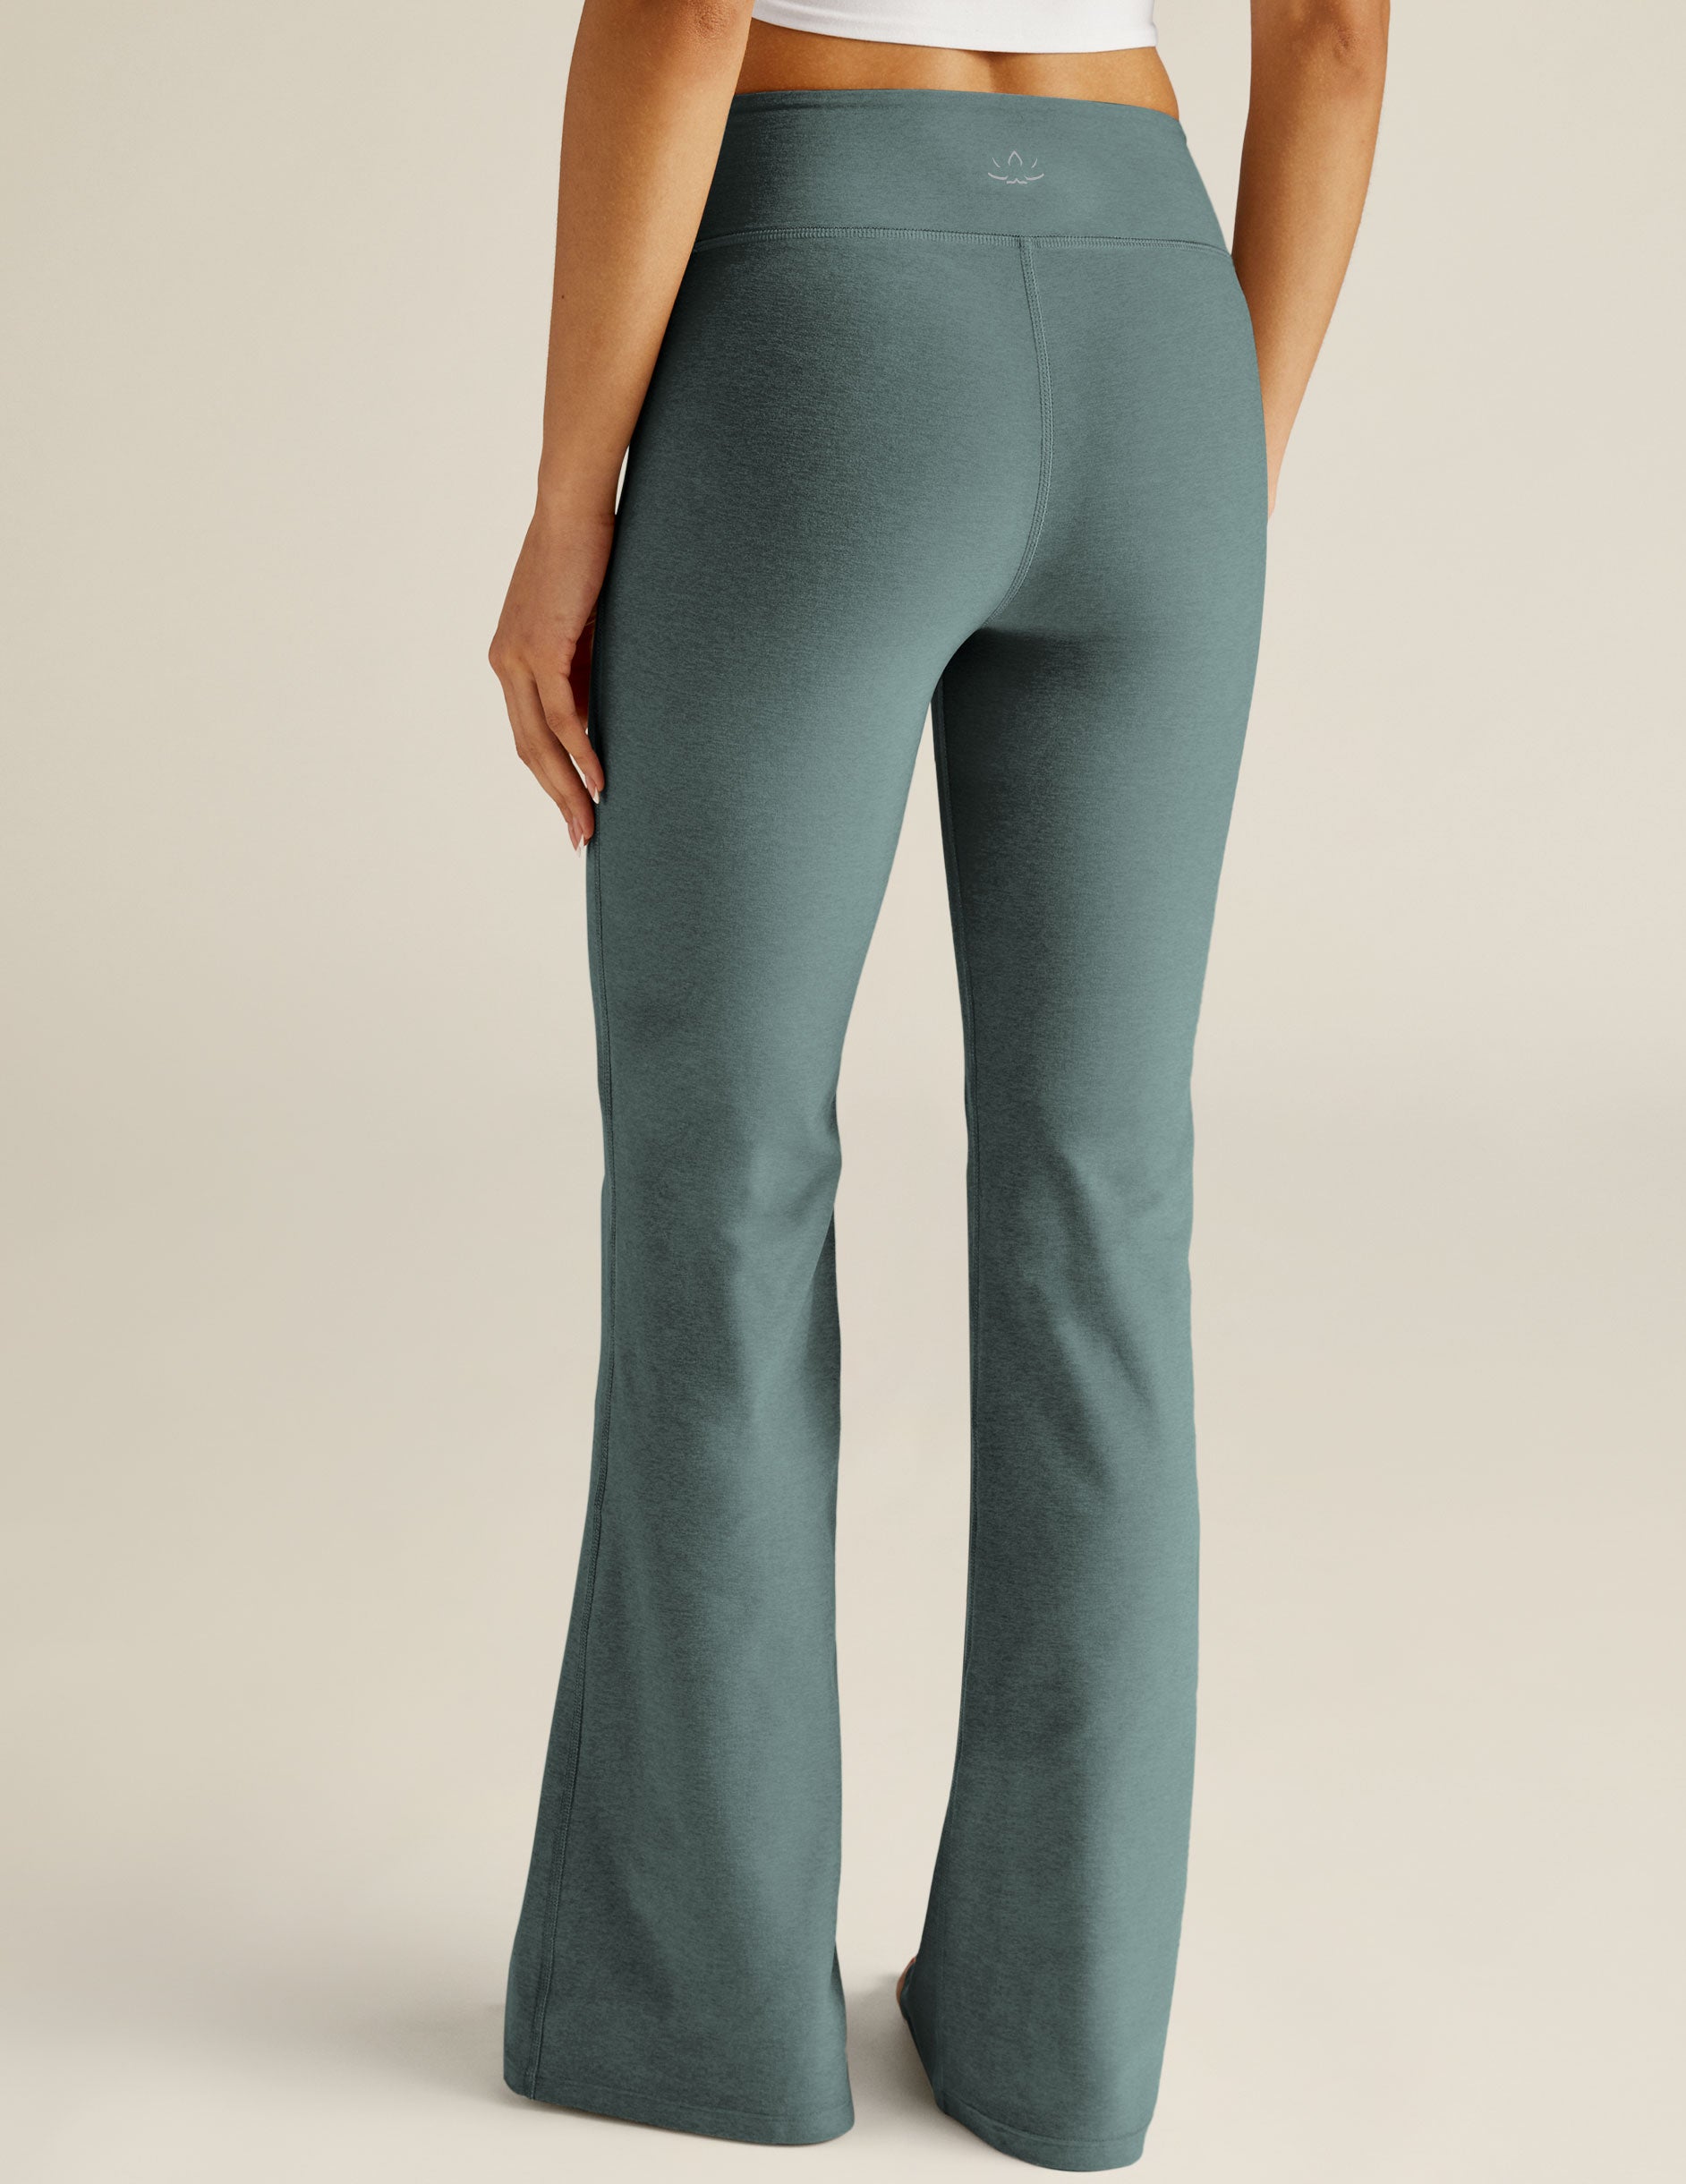 blue low rise flare athleisure pants. 